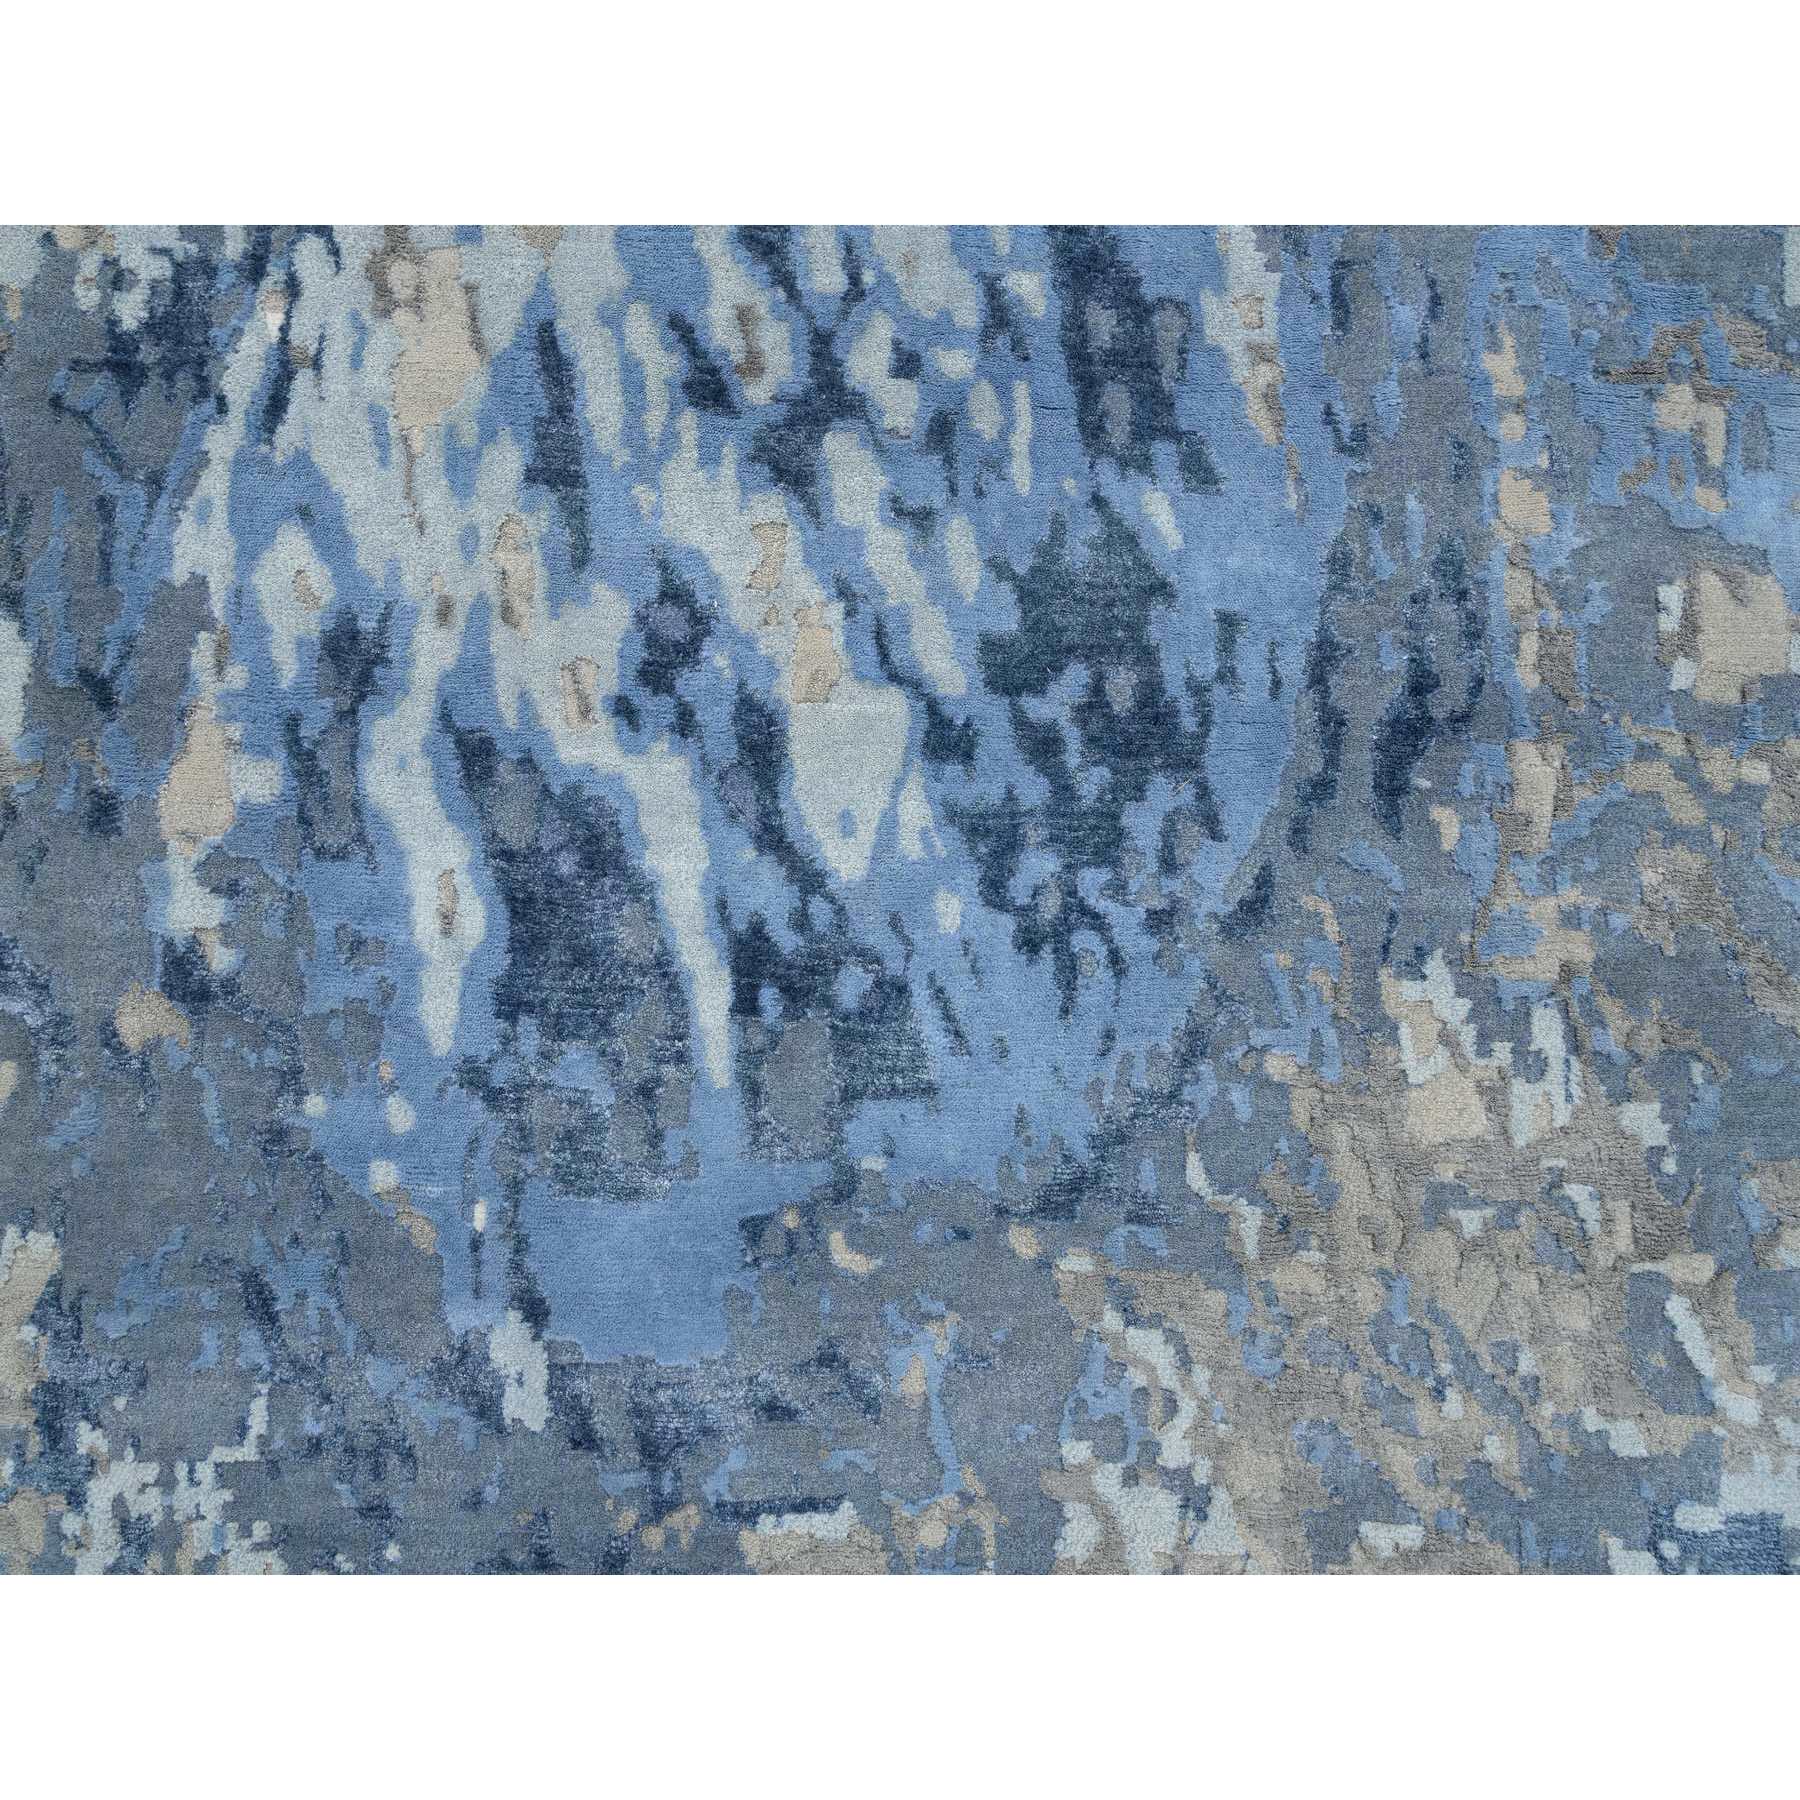 4'2"x9'10" Blue, Wool and Silk Hand Woven, Modern Abstract Design Hi-low Pile, Wide Runner Oriental Rug 